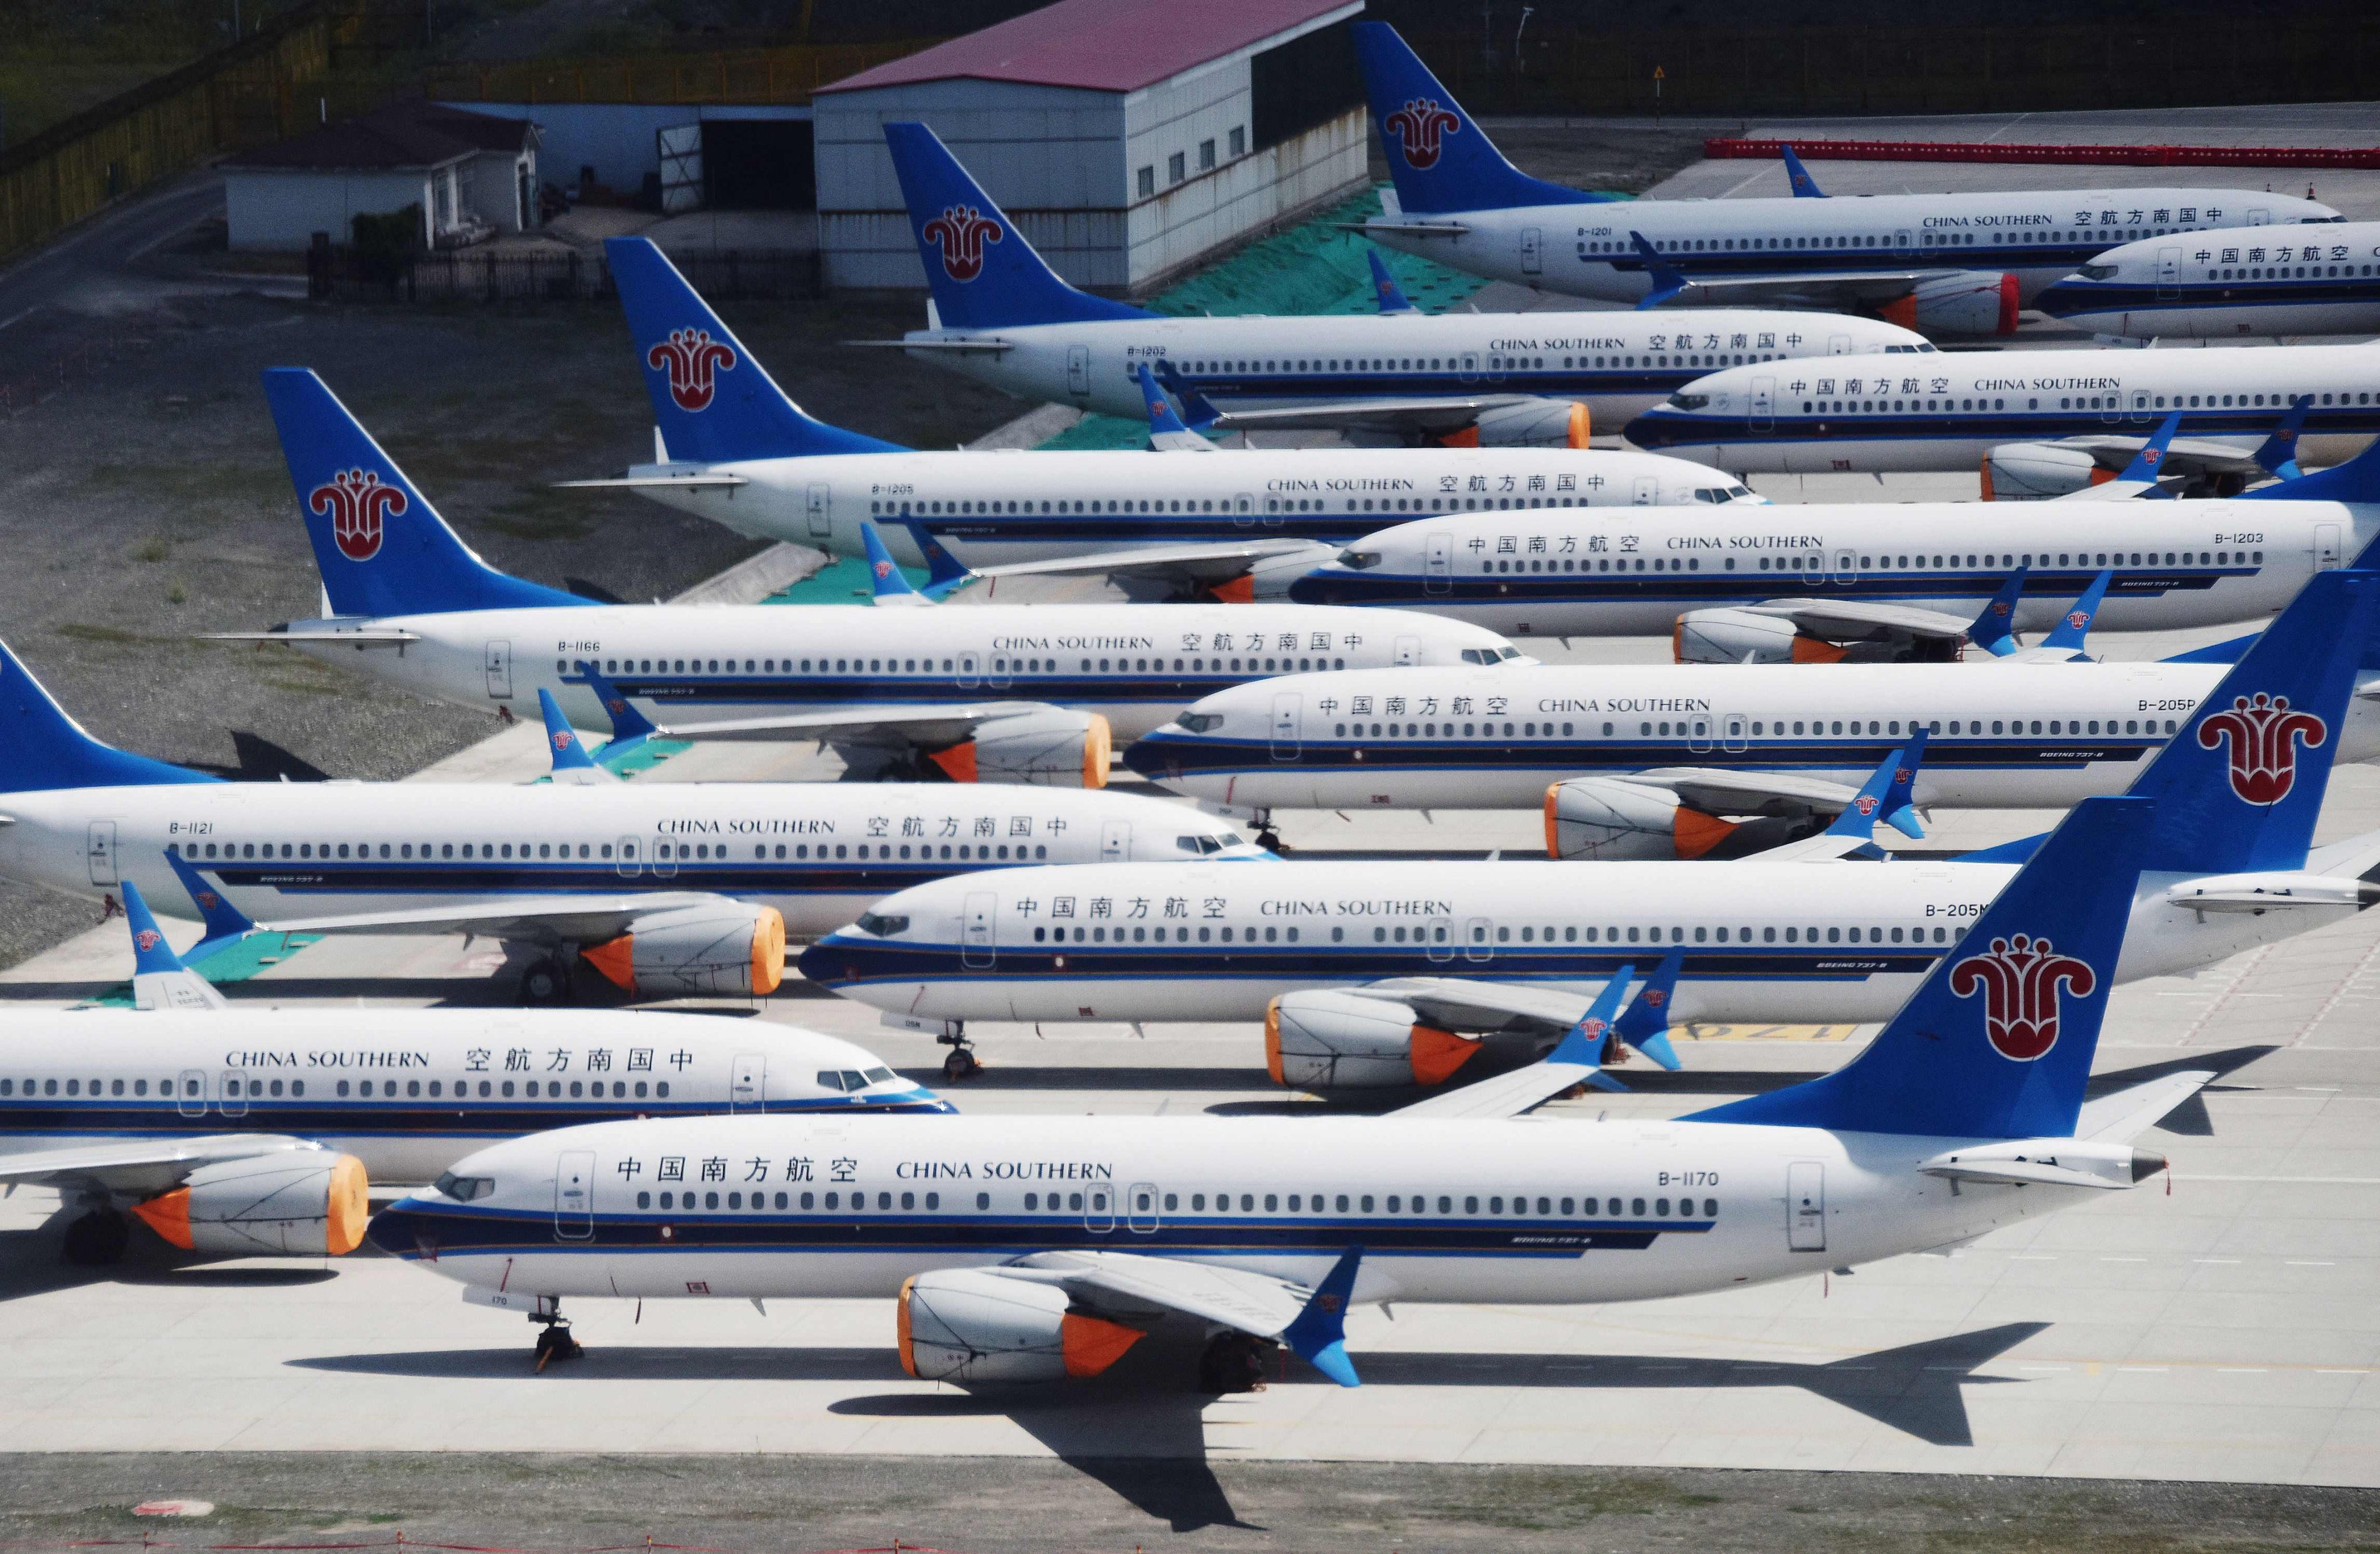 A fleet of Boeing 737 MAX aircraft bearing the livery of China Southern Airlines parked at Urumqi airport in western China’s Xinjiang regionon June 5, 2019. Photo: AFP